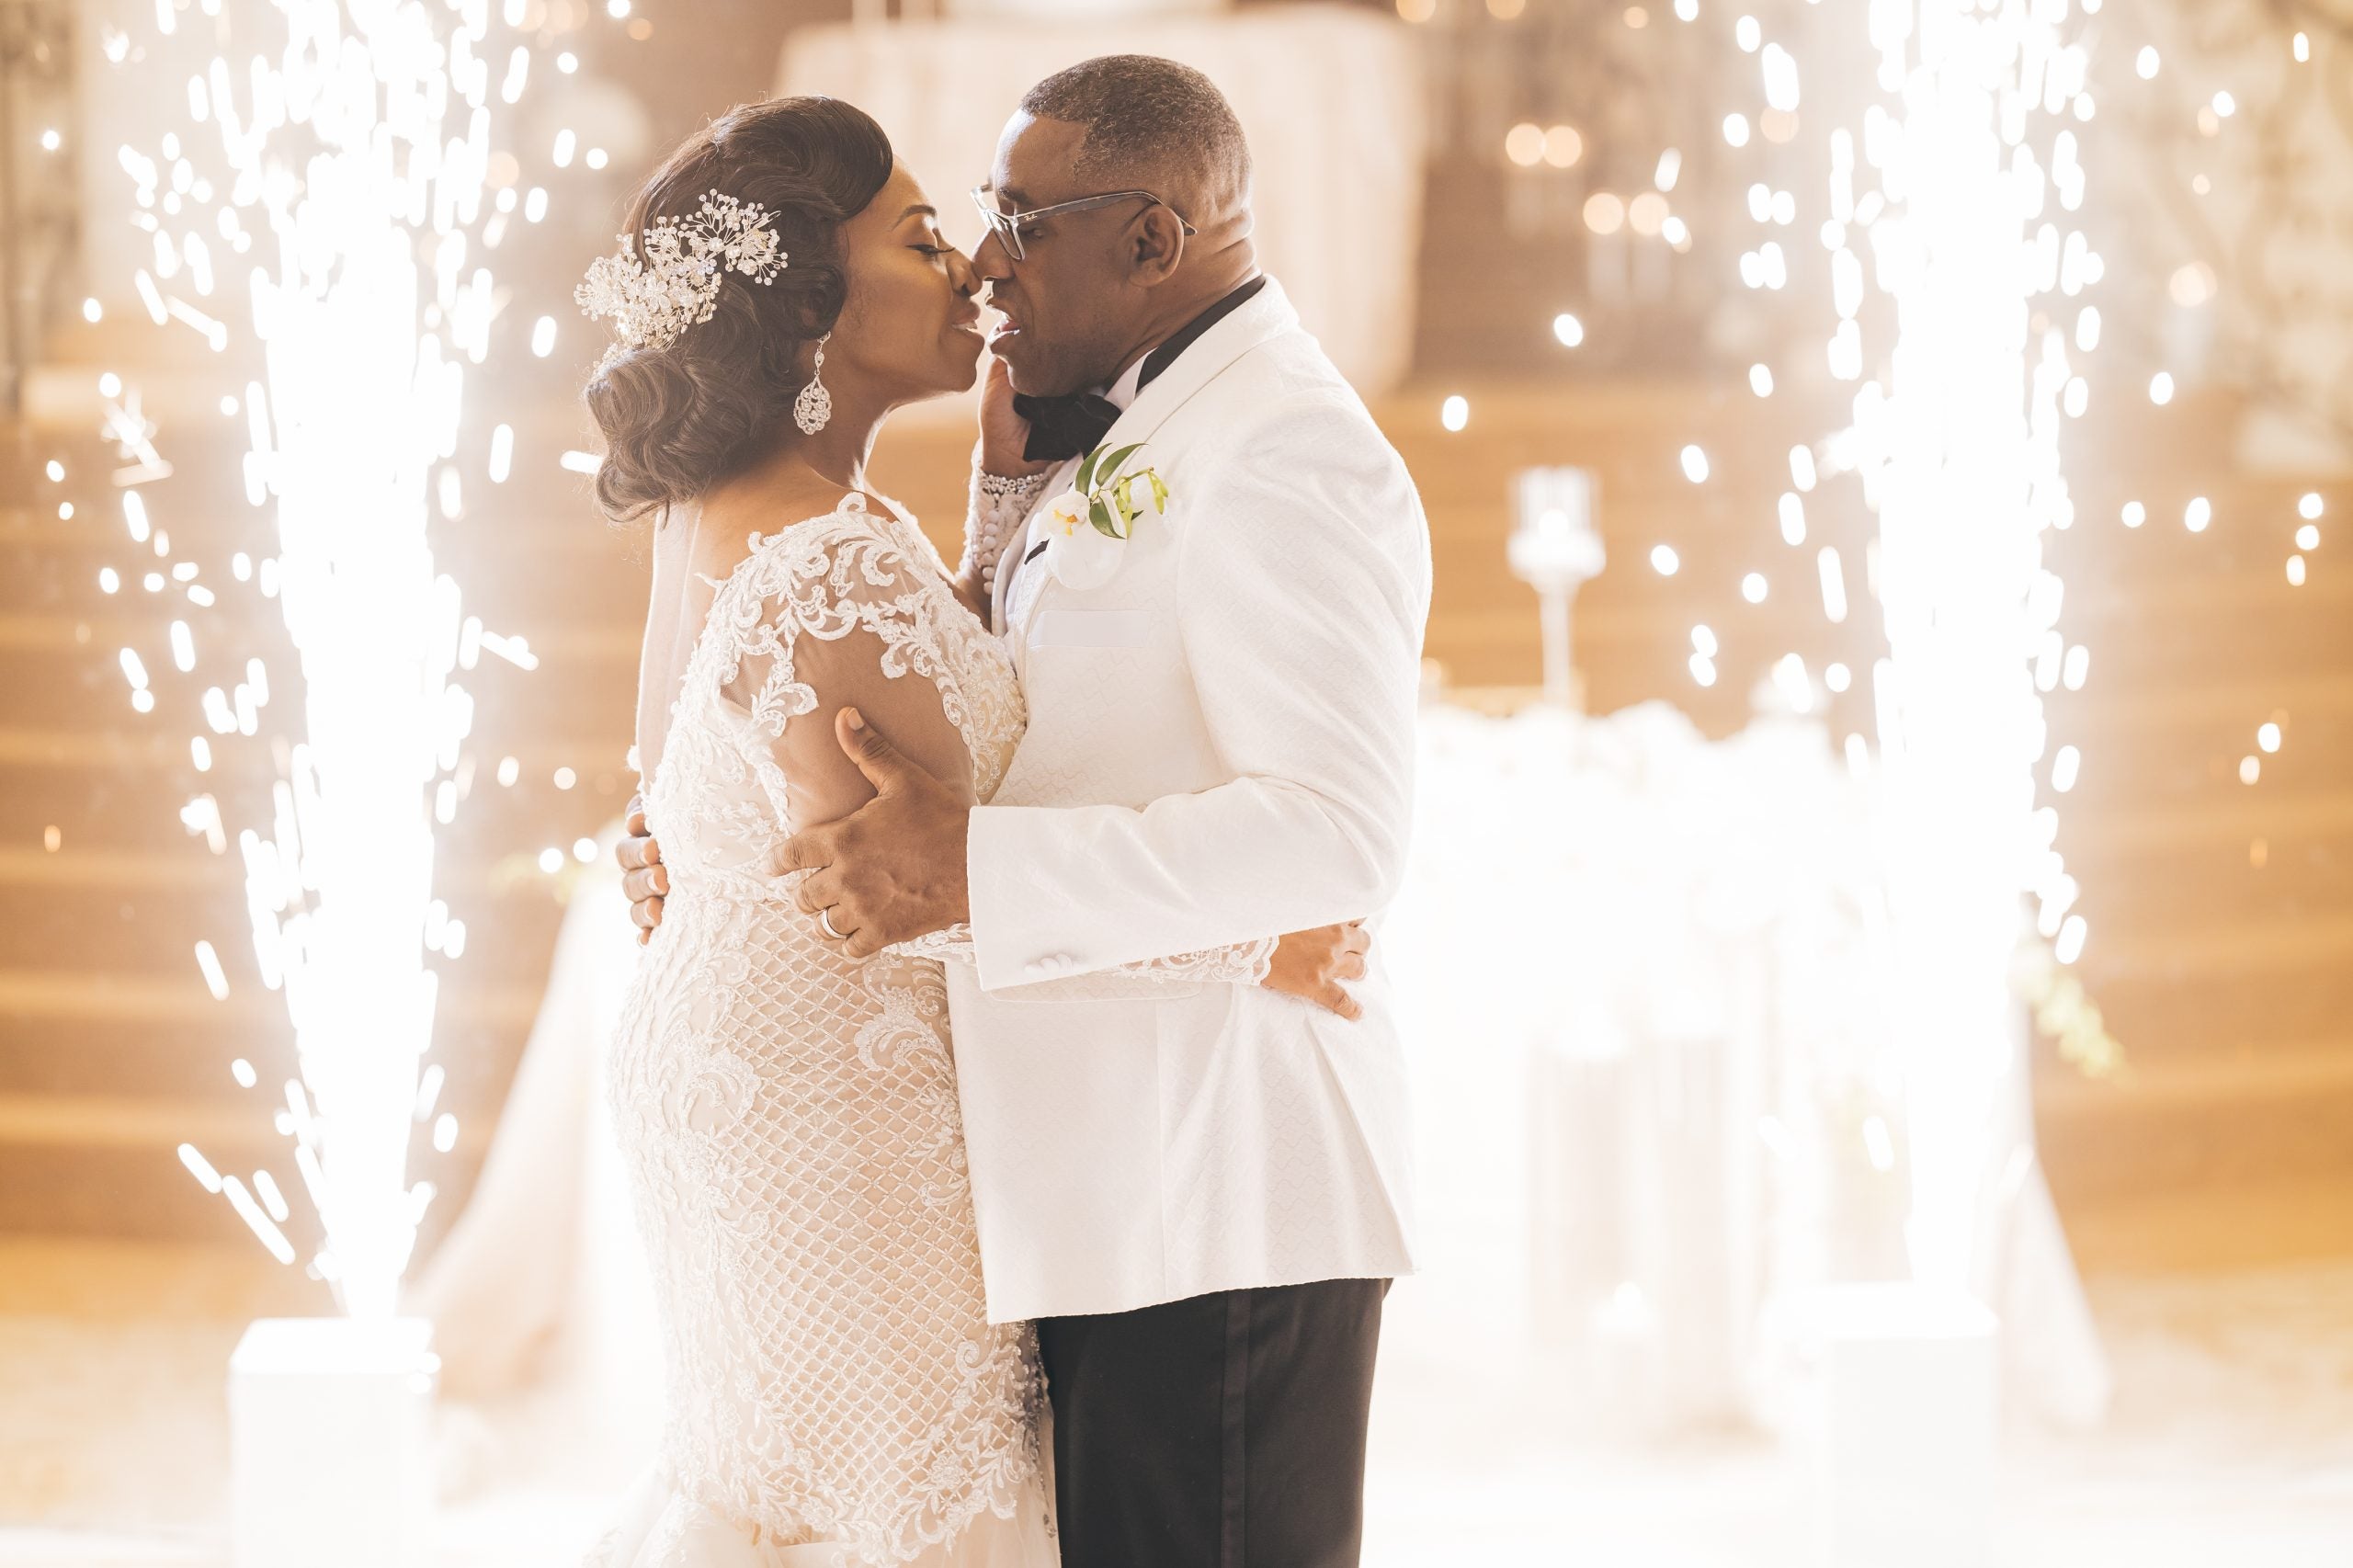 Bridal Bliss: Mia And William Had Plenty Surprises At Their Upscale Glam Wedding